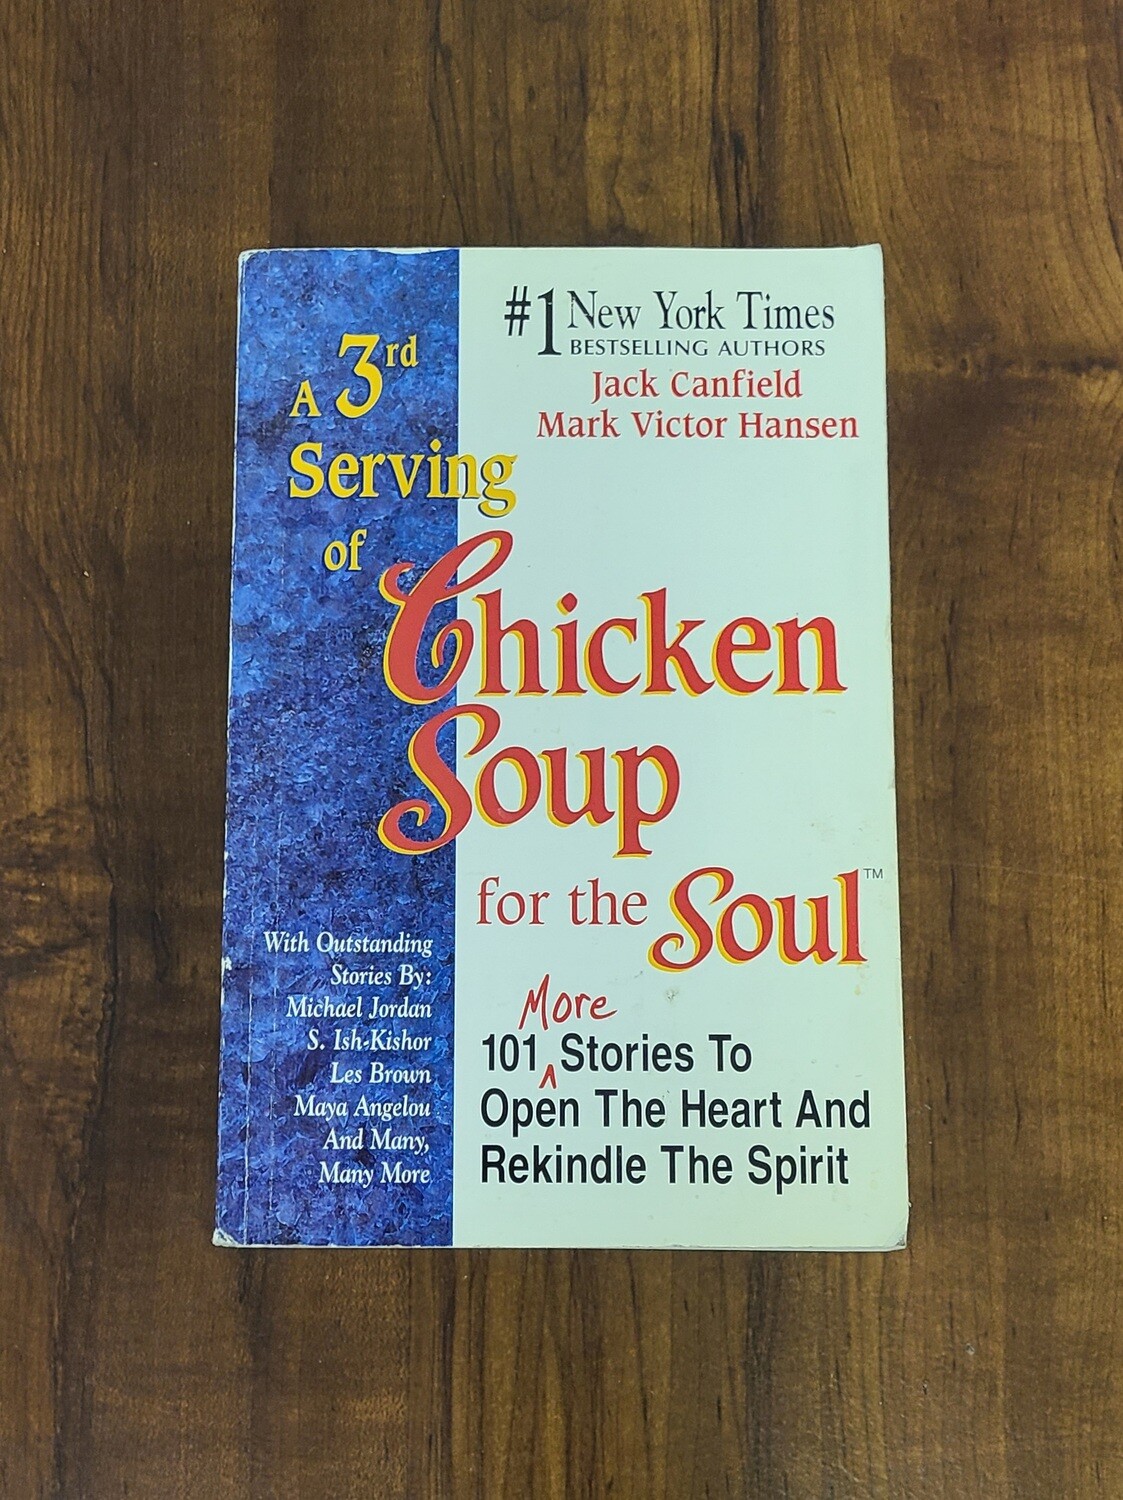 A 3rd Serving of Chicken Soup for the Soul by Jack Canfield and Mark Victor Hansen